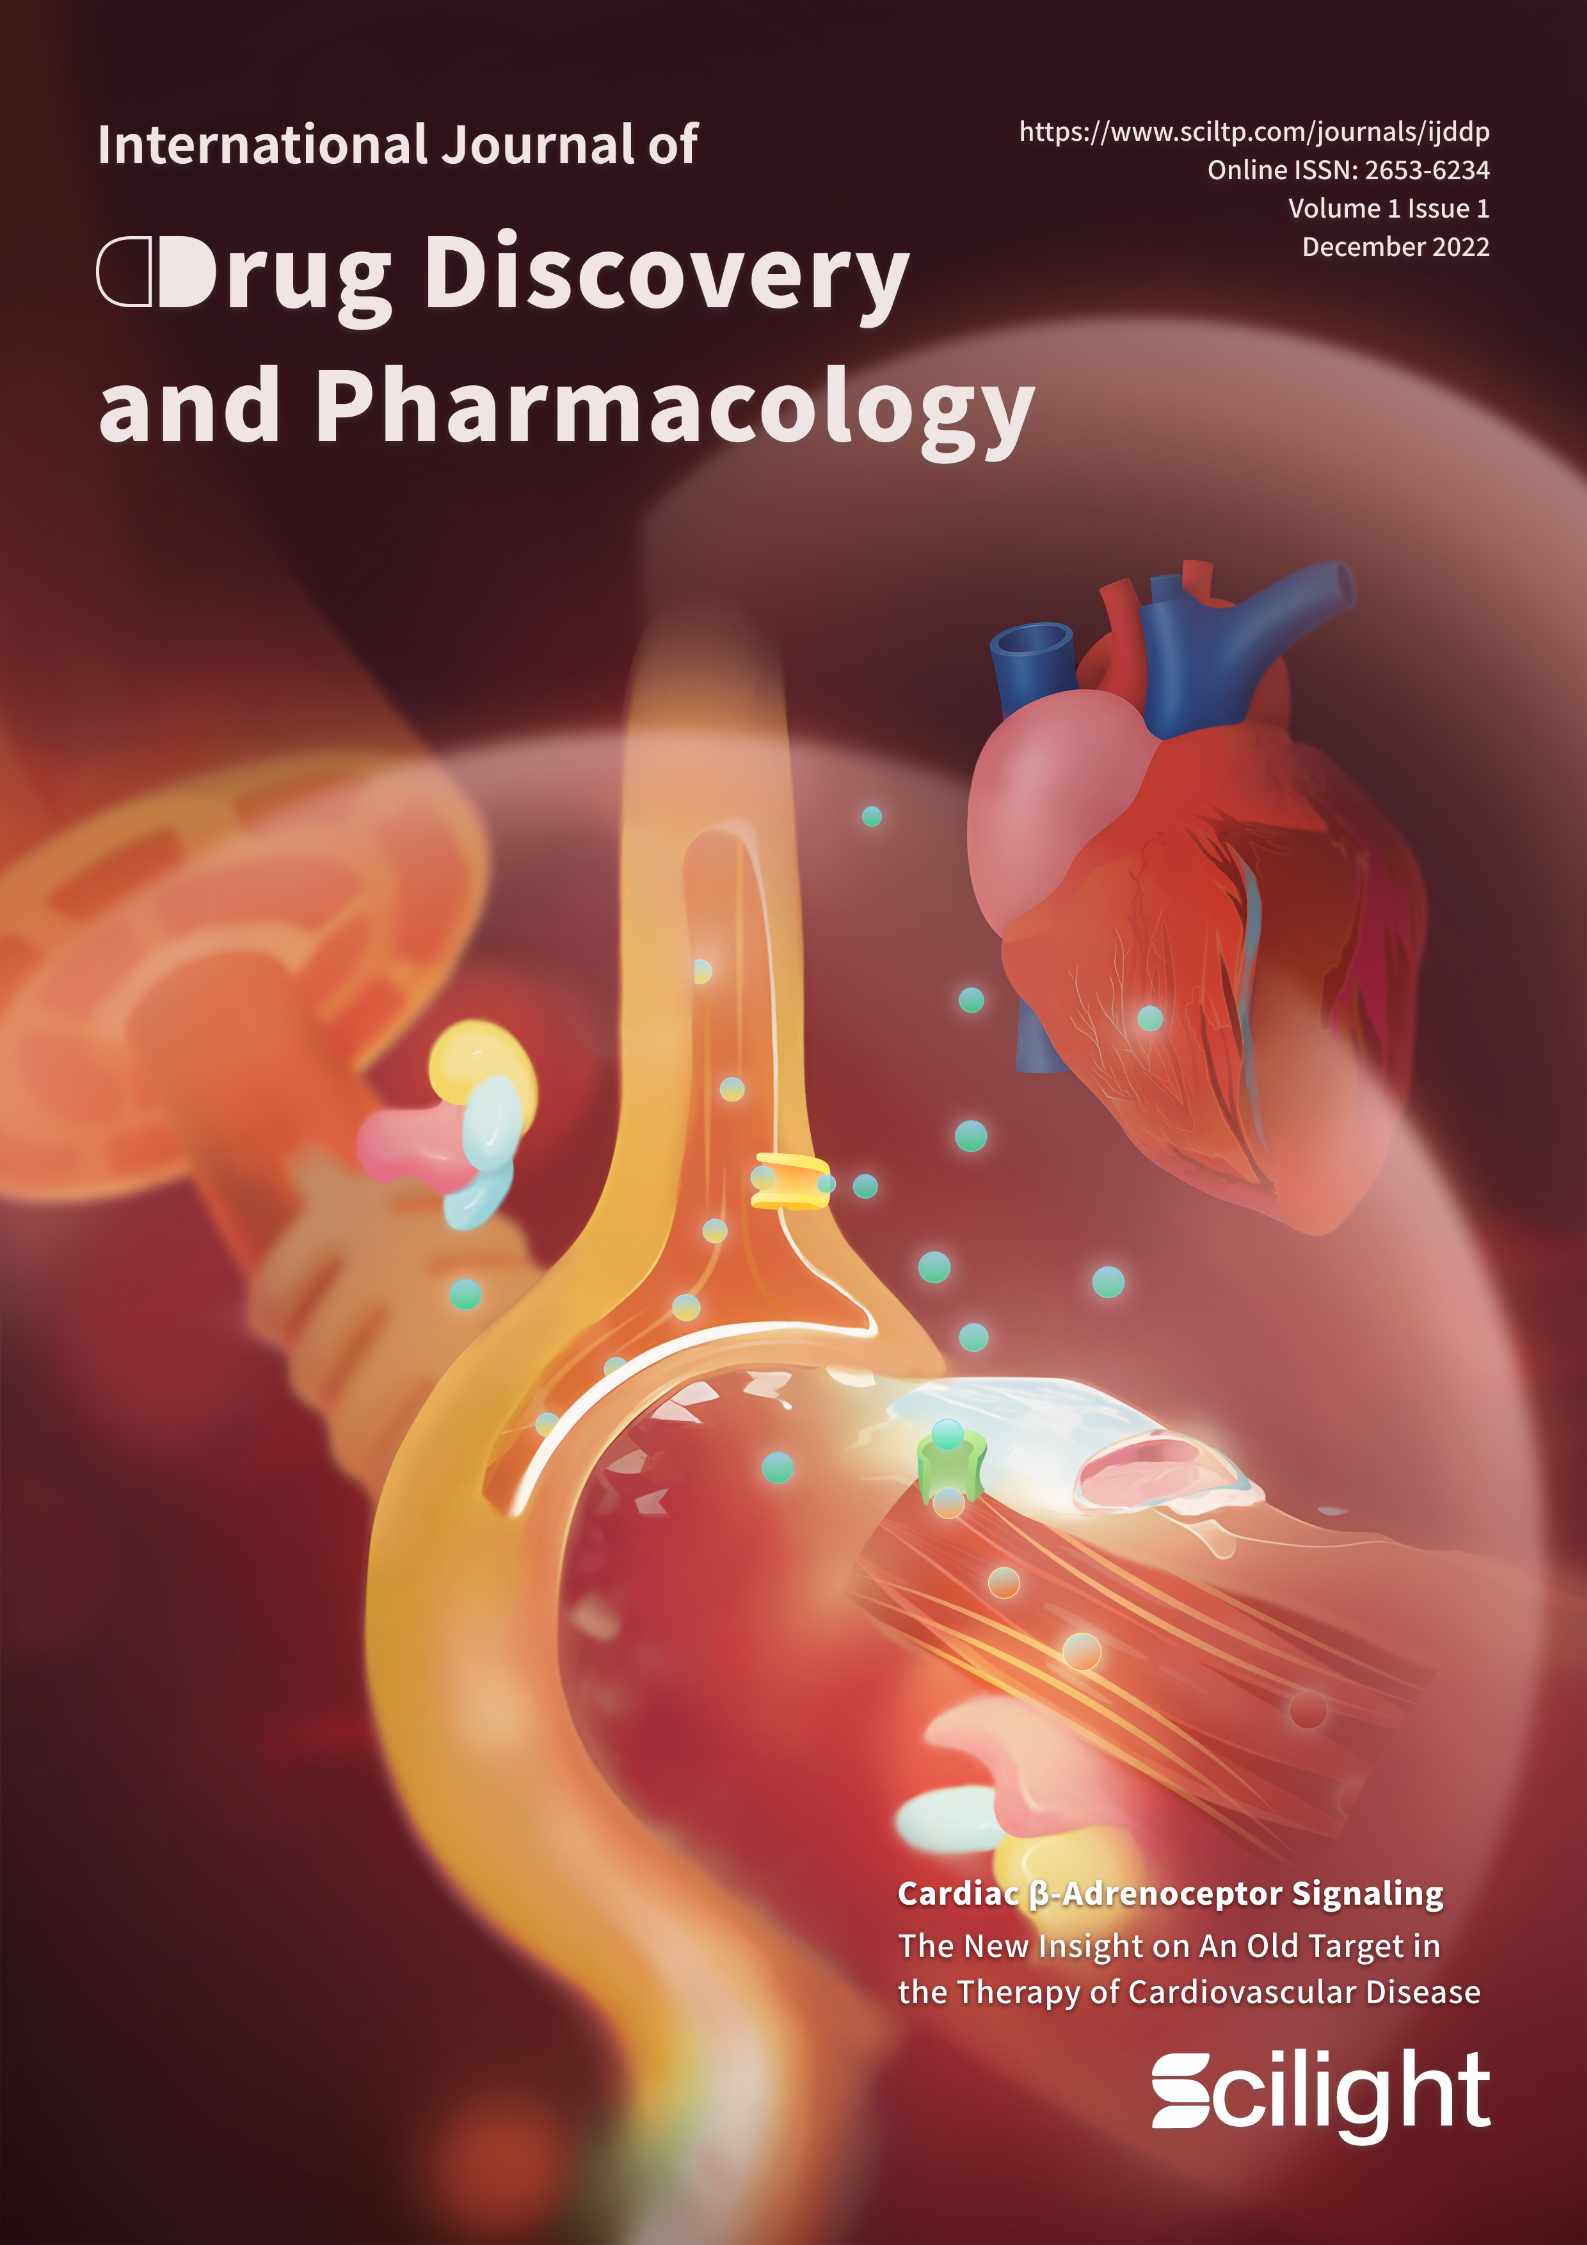 International Journal of Drug Discovery and Pharmacology